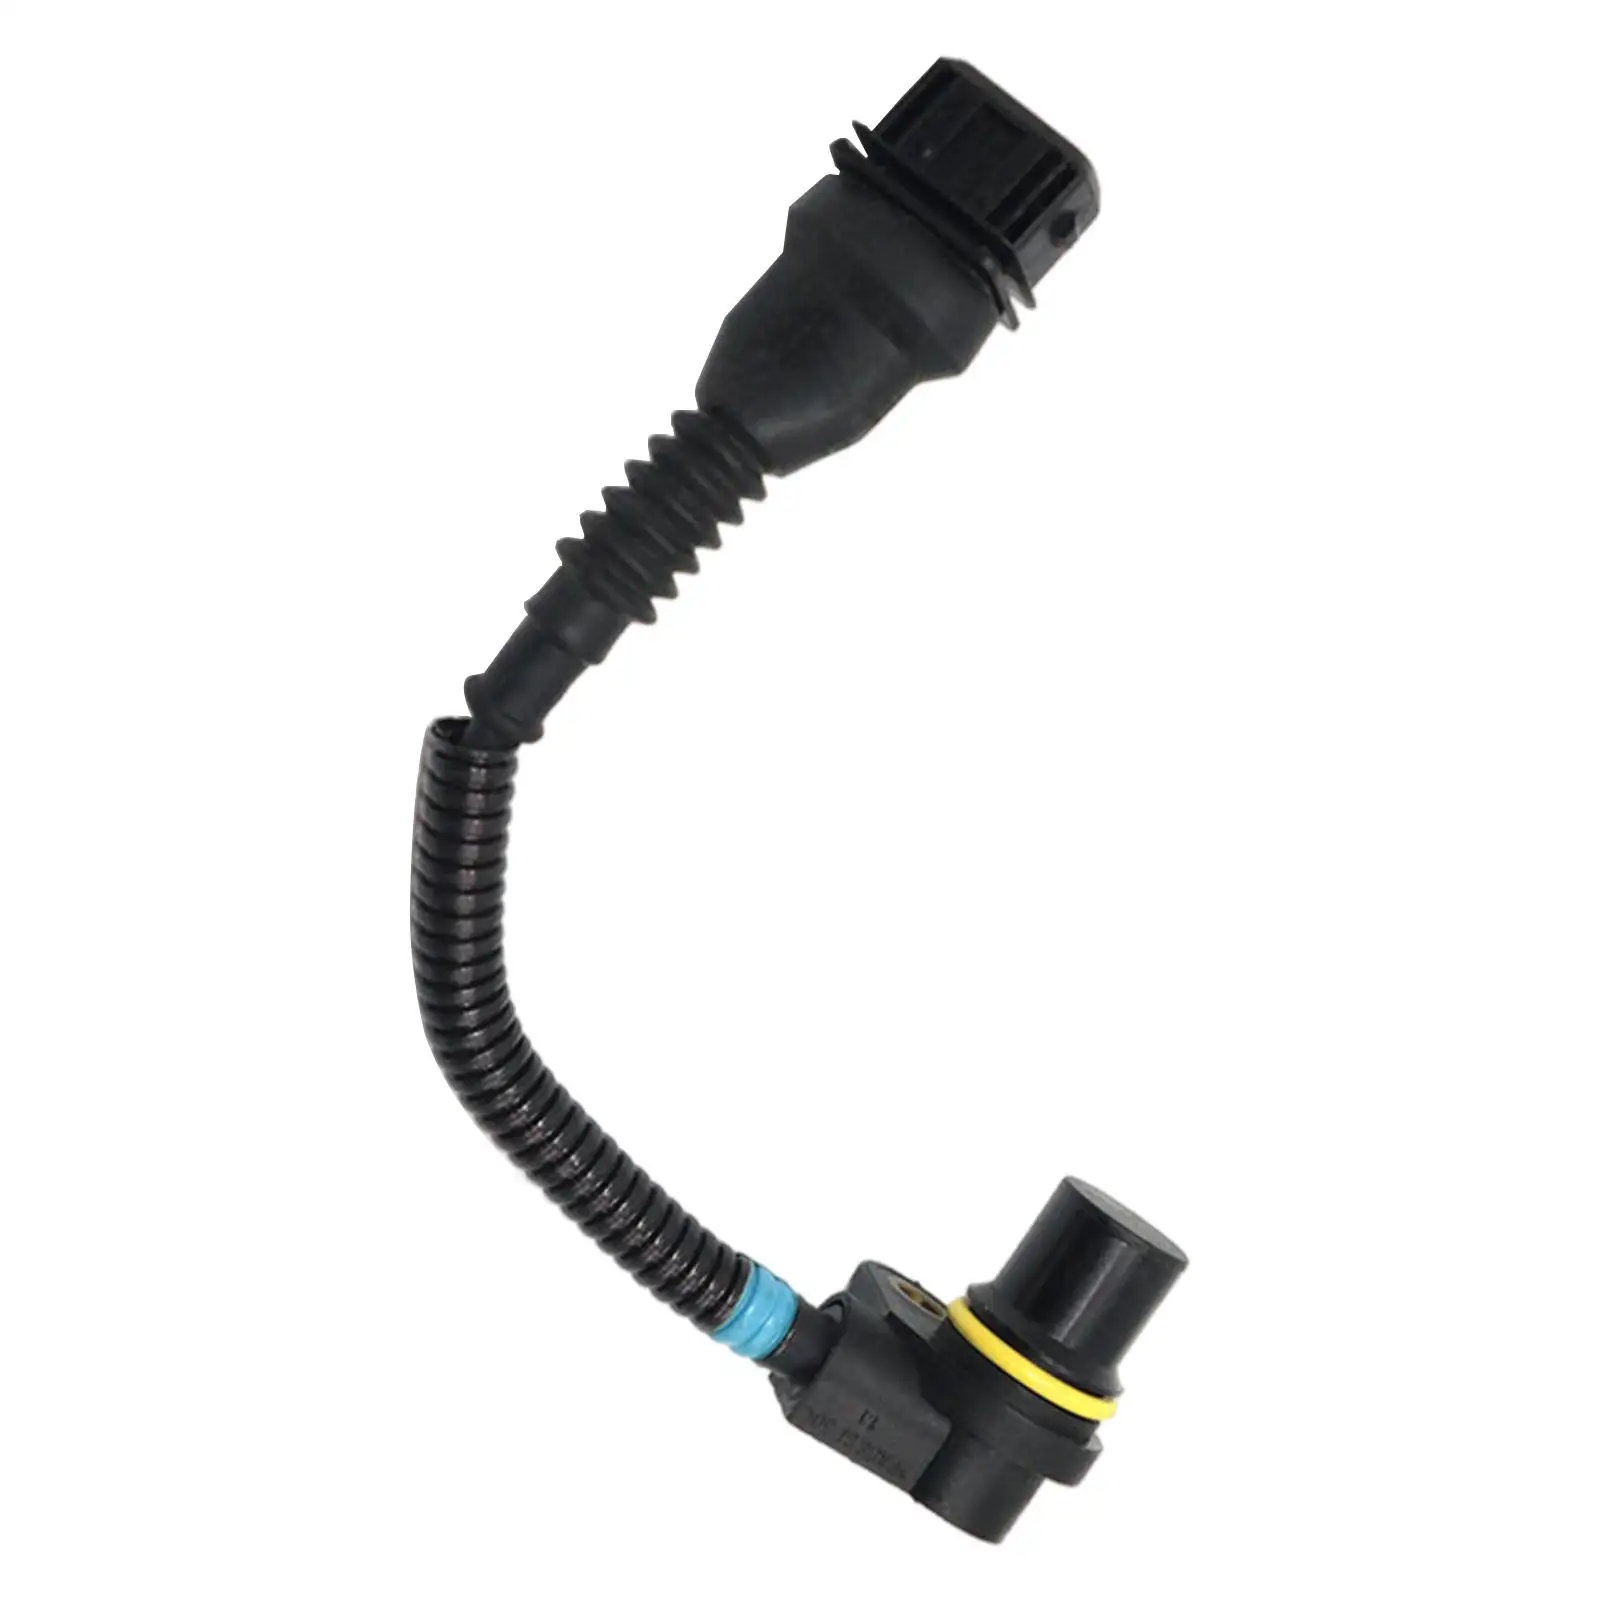 Automatic Transmission Rotational Speed Sensor Replacement 24357518732 for Mini Cooper R50 R52 2002-08 Vehicle Parts